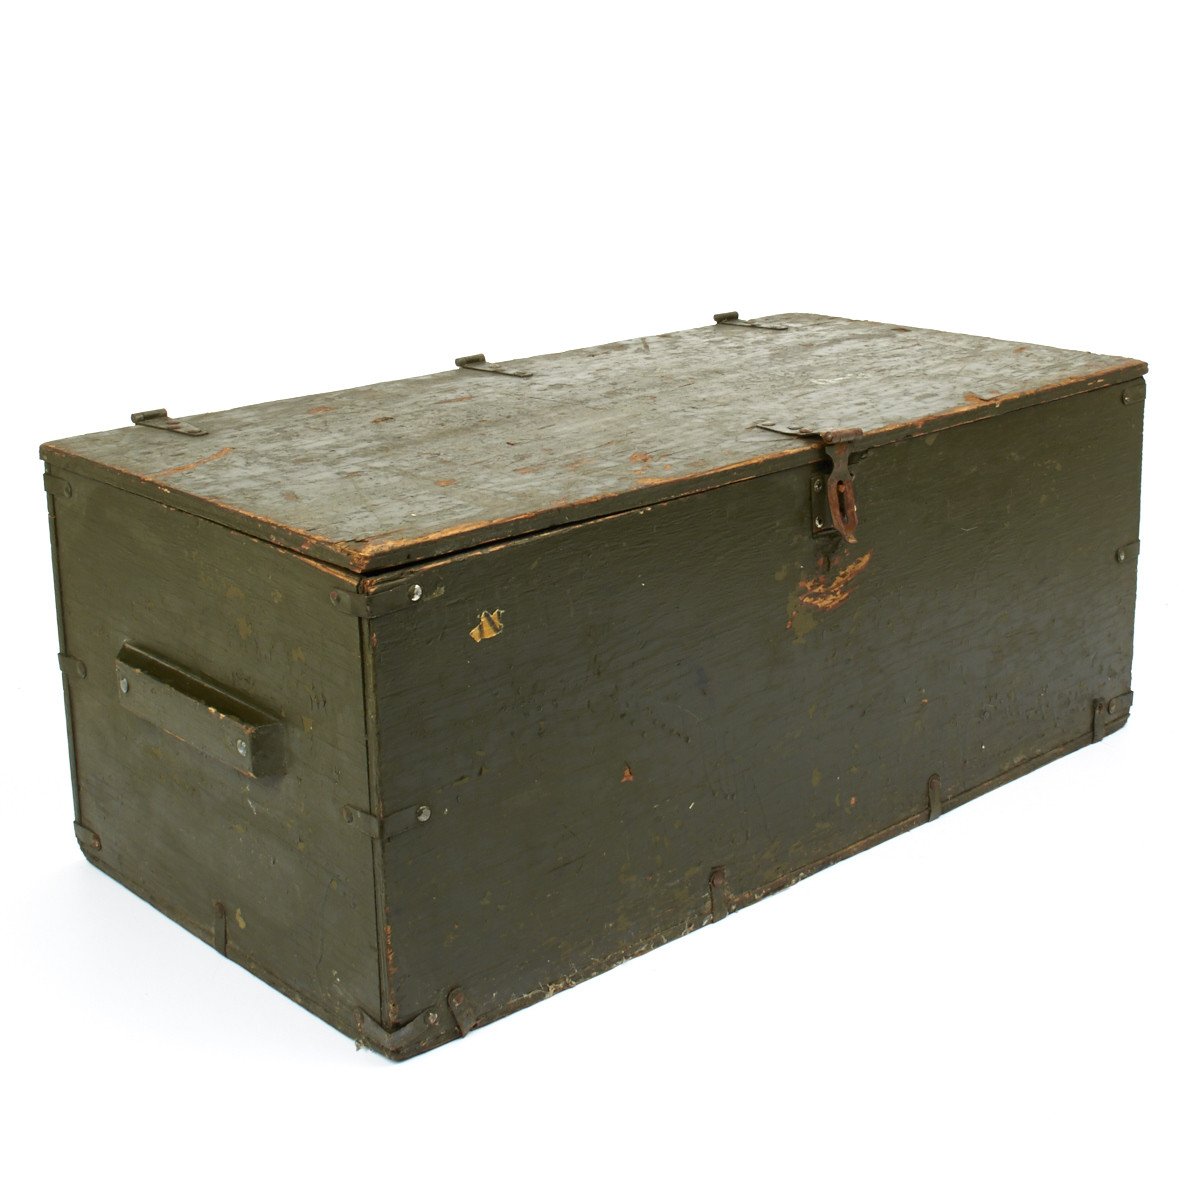 Authentic Vintage 1950's Large Wooden US Army Military Foot Locker Chest  Trunk